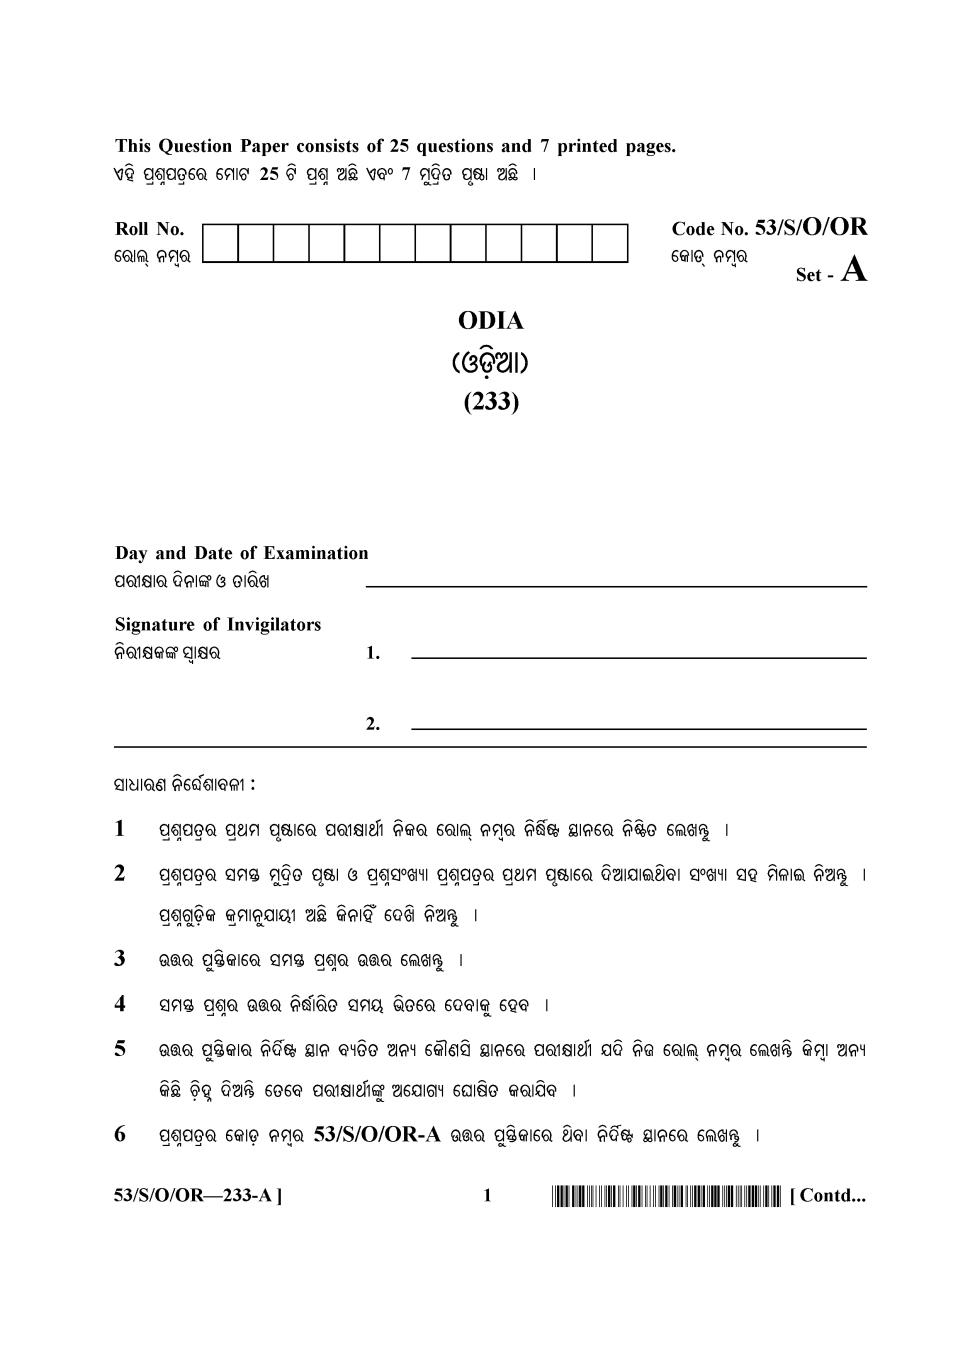 NIOS Class 10 Question Paper Oct 2016 - Odia - Page 1